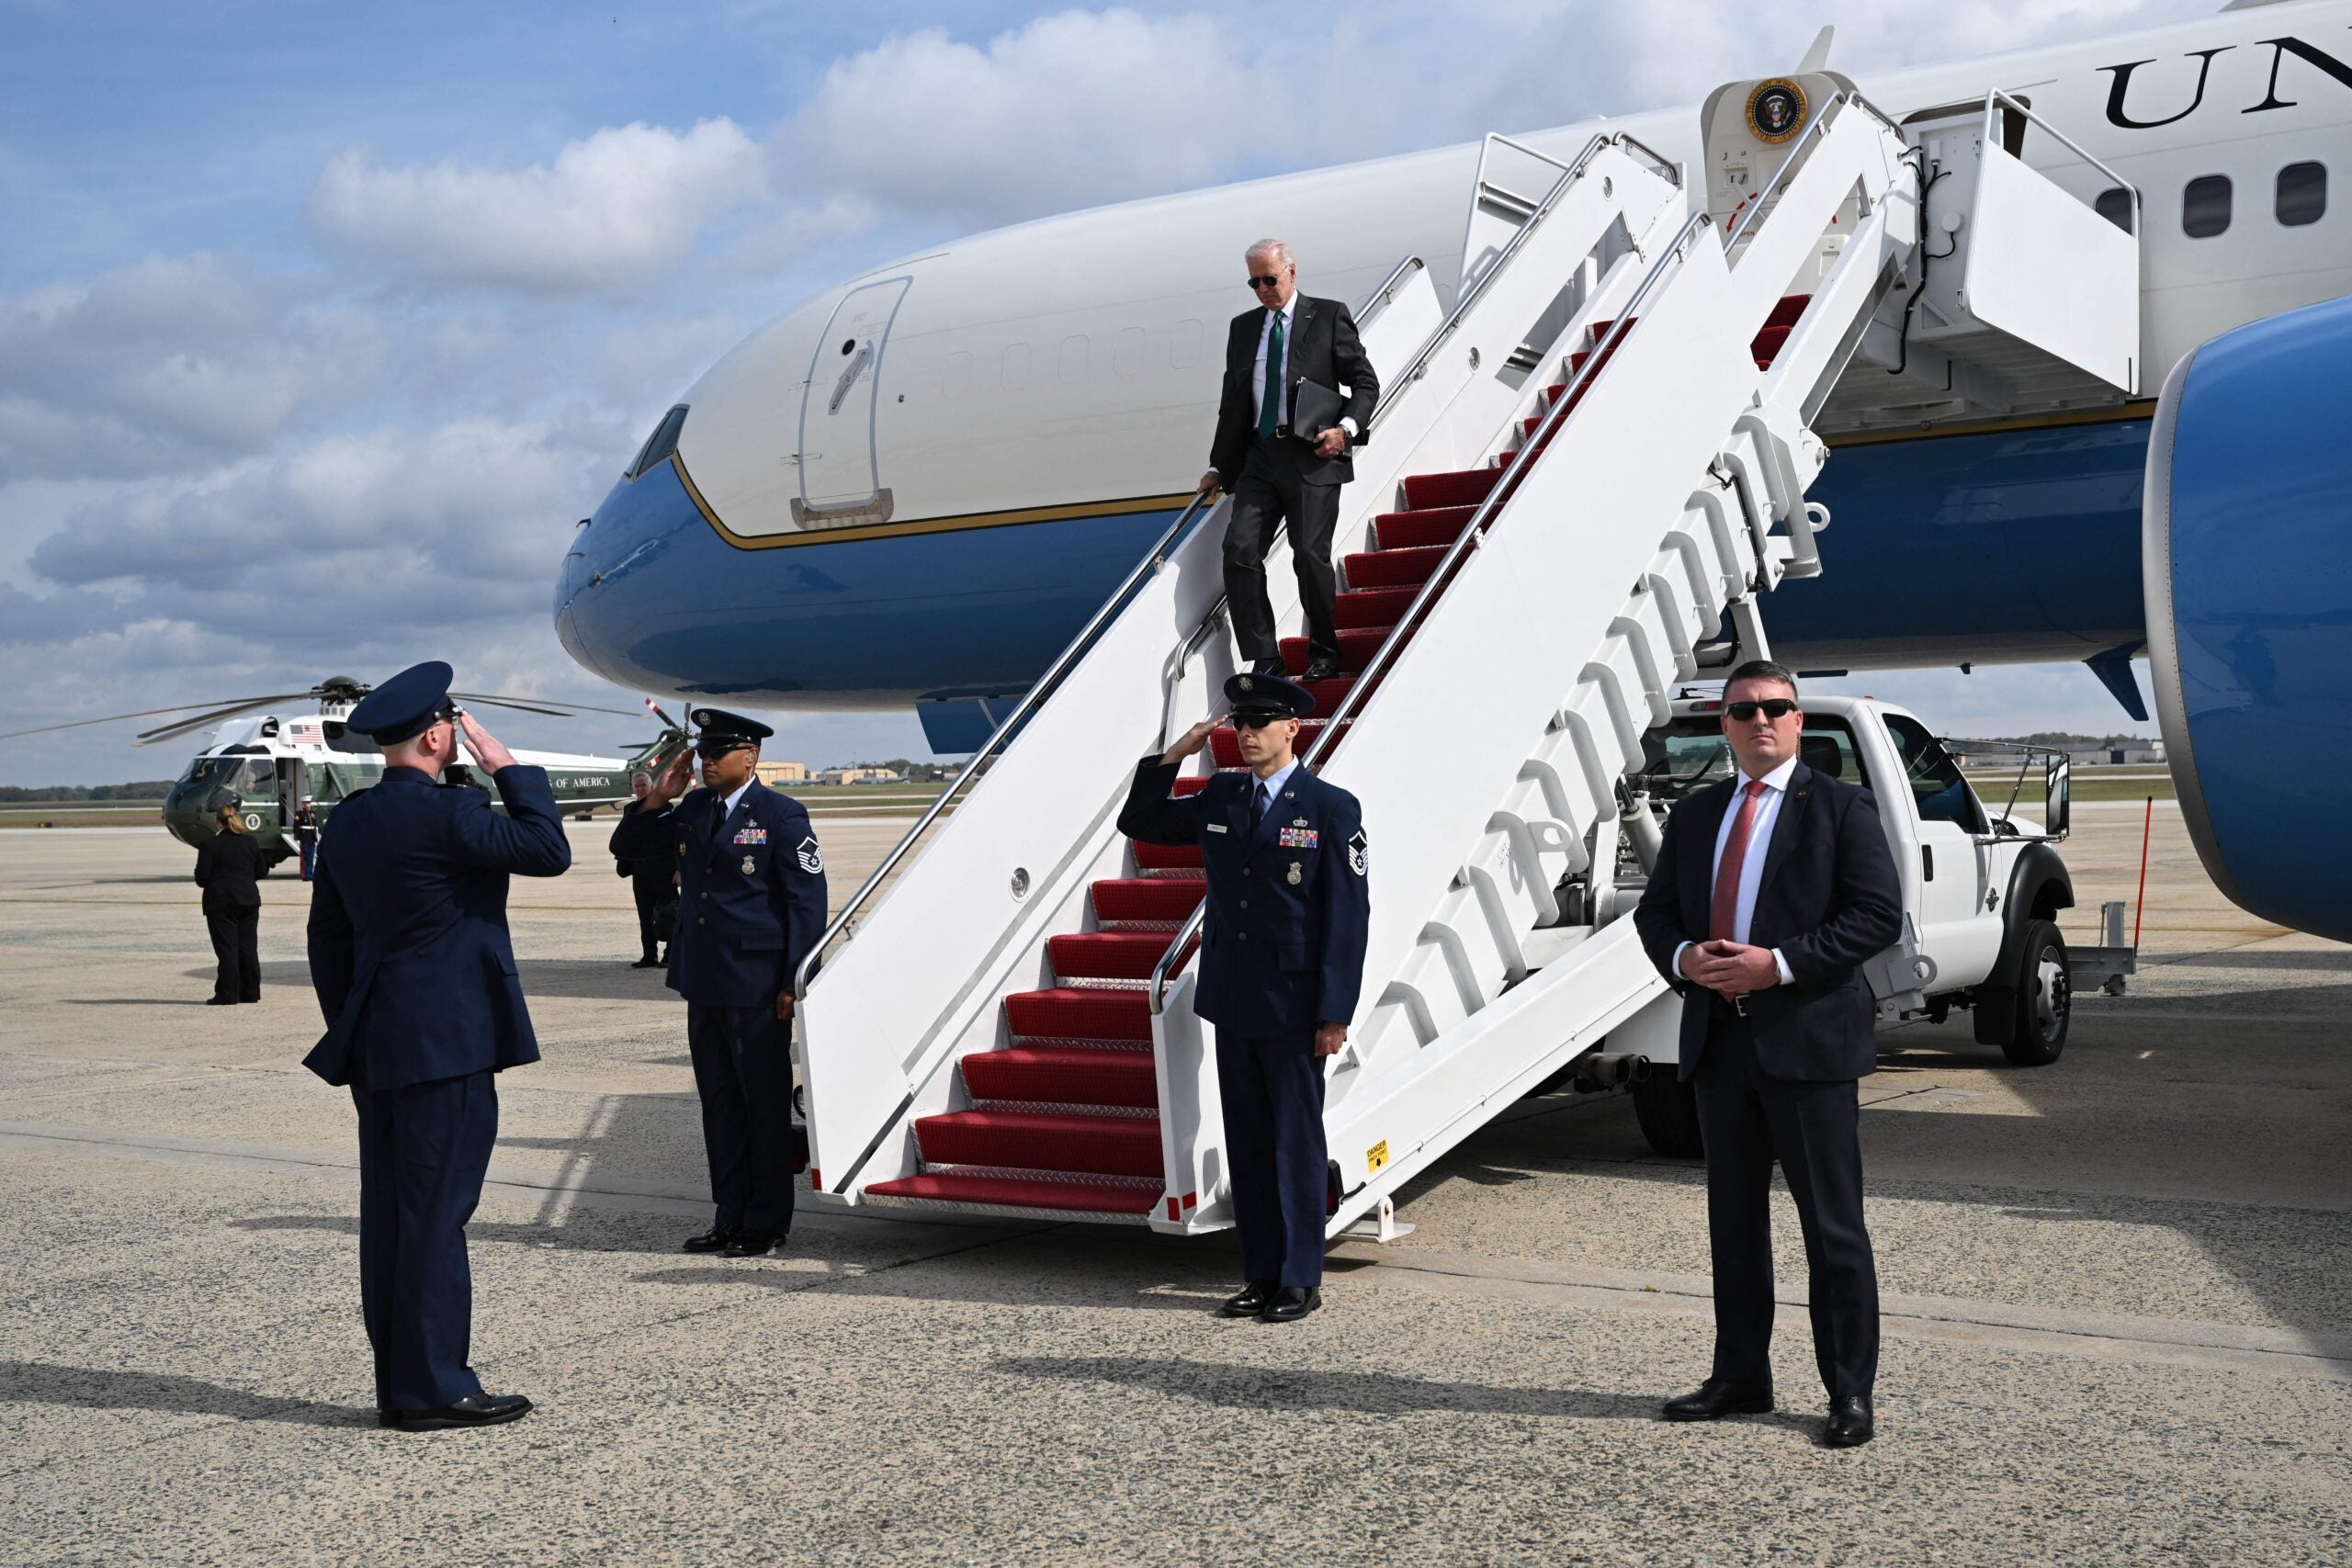 US President Joe Biden disembarks Air Force One at Joint Base Andrews in Maryland on October 17, 2022. - Biden is returning to the White House in Washington, DC, following a trip to Colorado, California, Oregon, and Delaware. (Photo by SAUL LOEB / AFP) (Photo by SAUL LOEB/AFP via Getty Images)